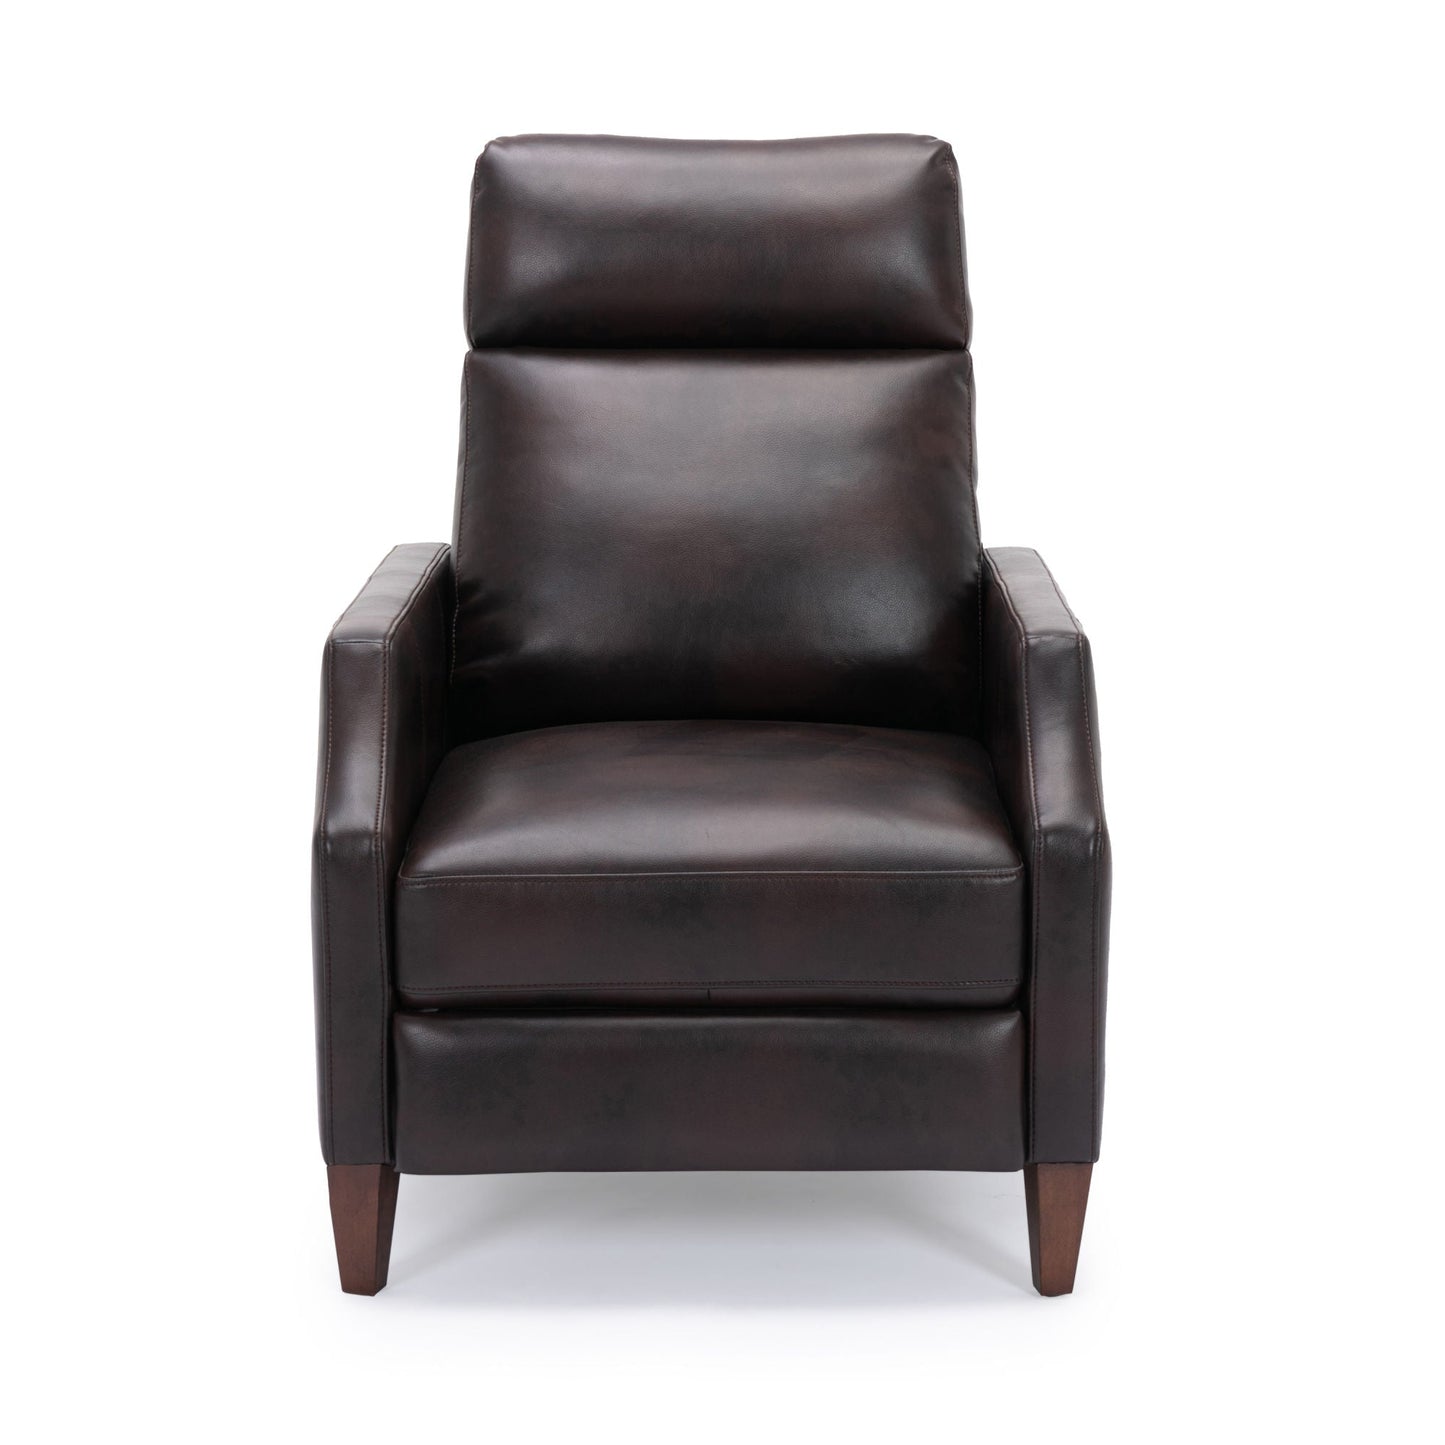 Biscoe Push Back Recliner - Burnished Brown Home Decor by Design